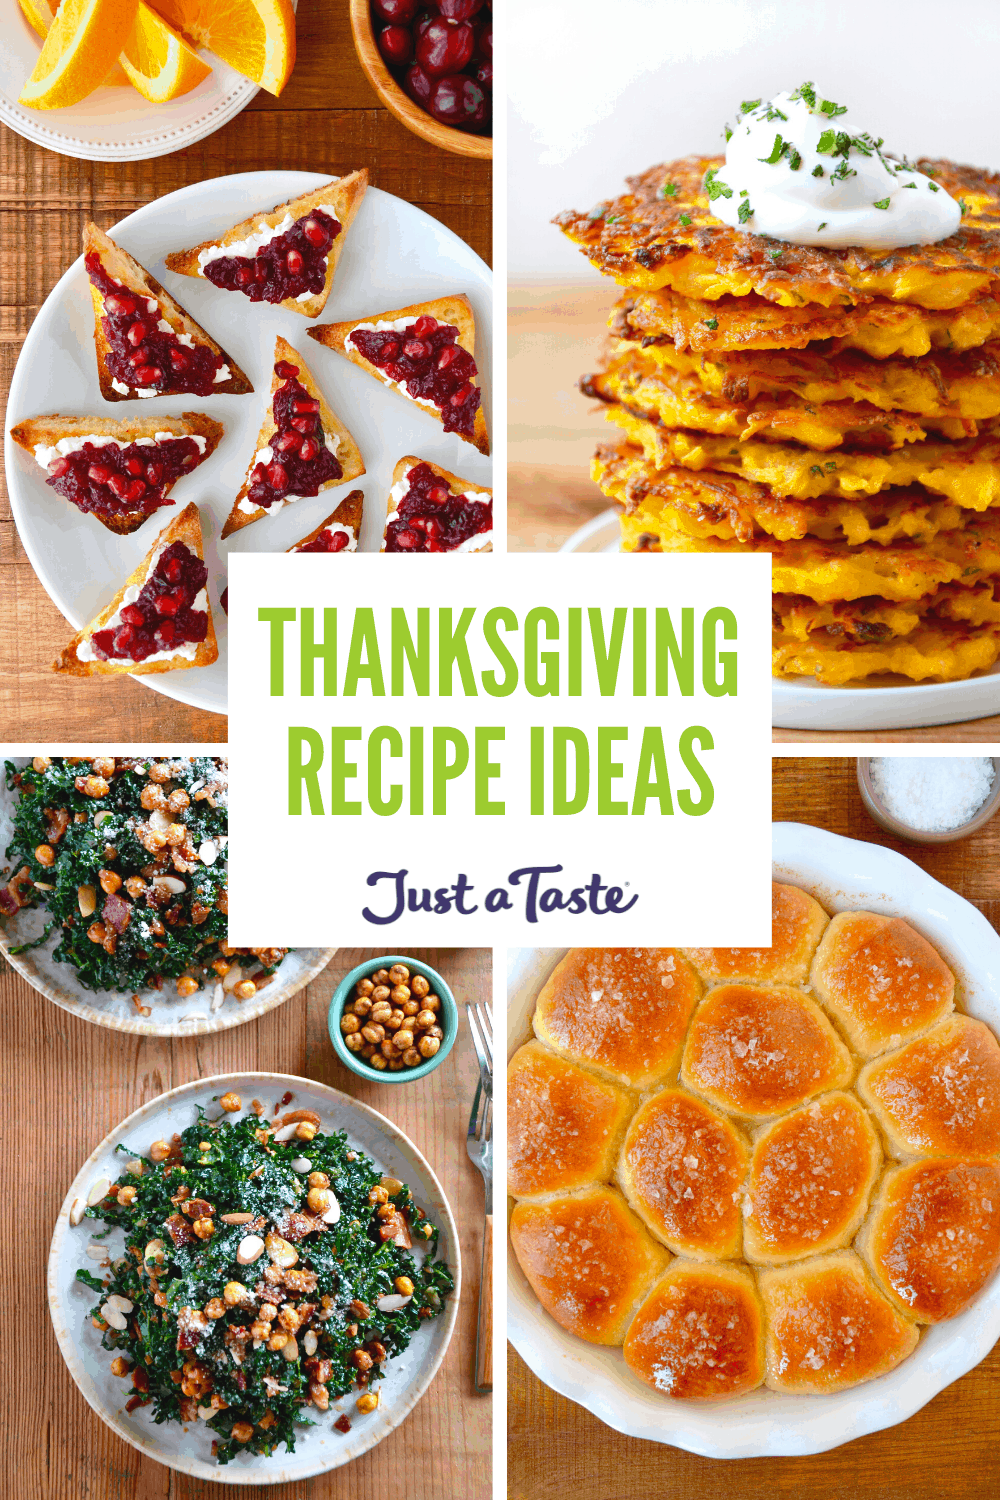 Thanksgiving Dinner Ideas: 15-Minute Cranberry Relish, 5-Ingredient Butternut Squash Fritters, Easy Homemade Dinner Rolls, and Kale Salad with Warm Bacon Vinaigrette